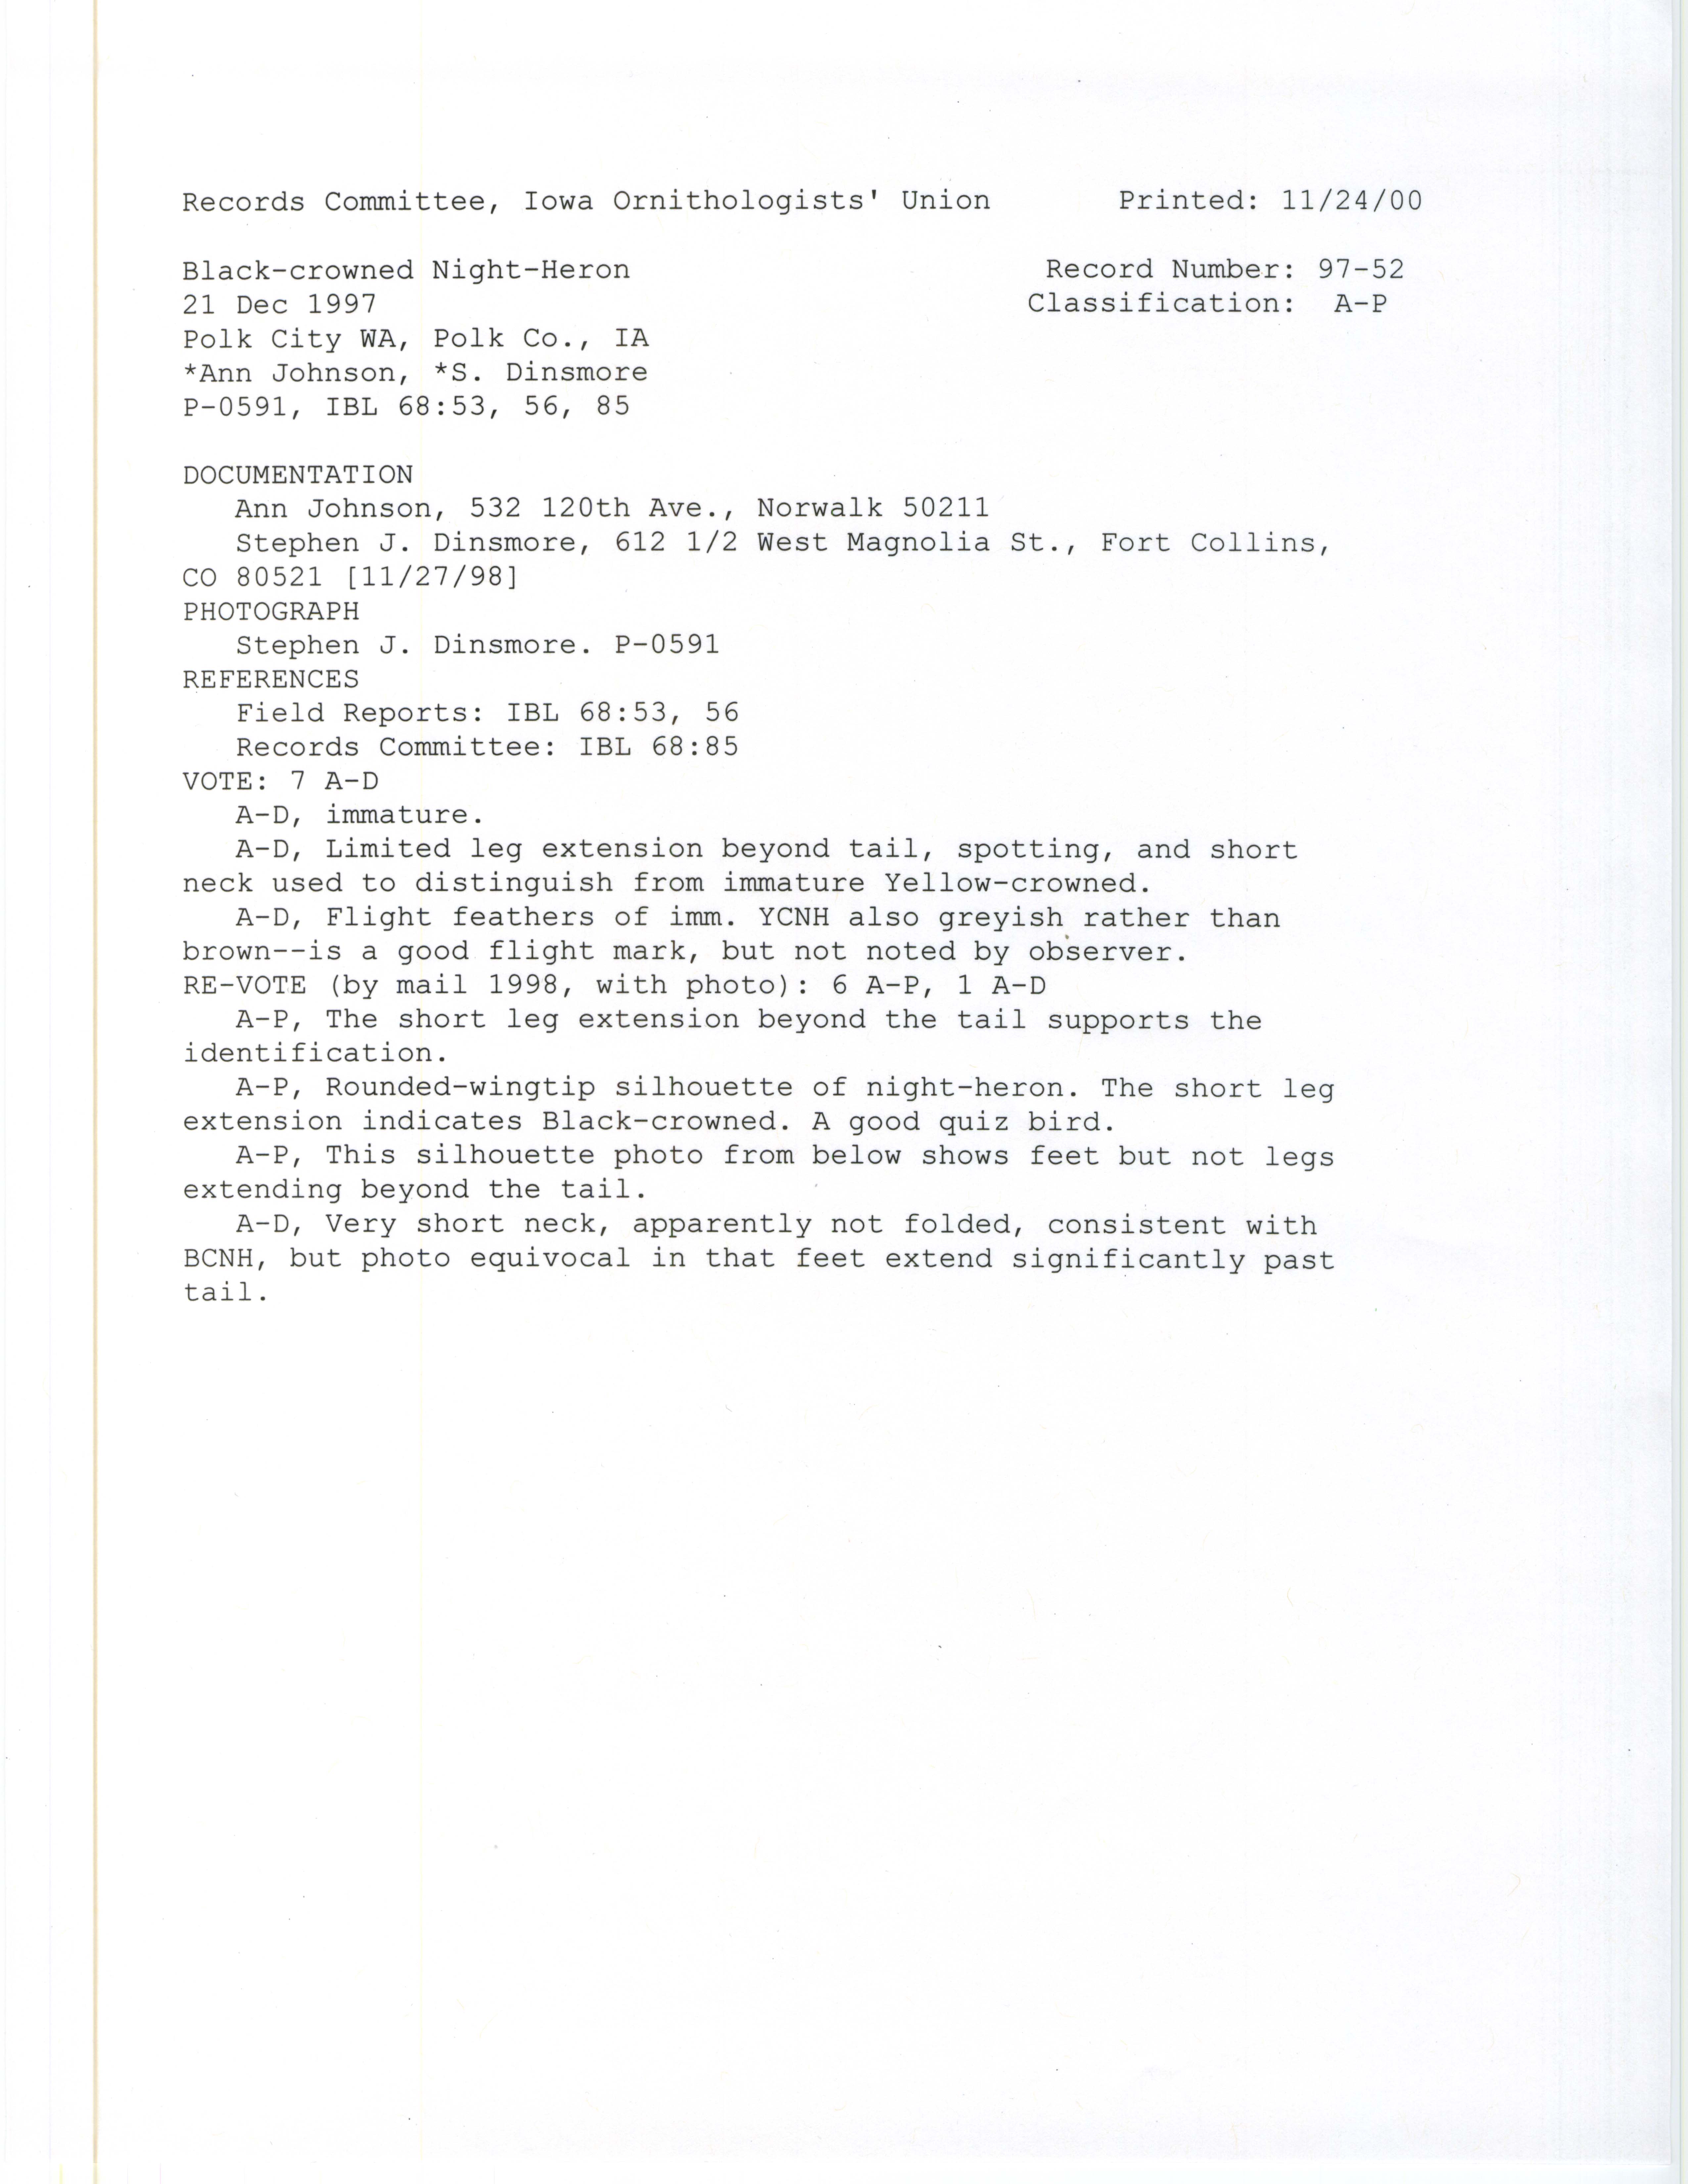 Records Committee review for rare bird sighting of Black-crowned Night-Heron at Polk City, 1997